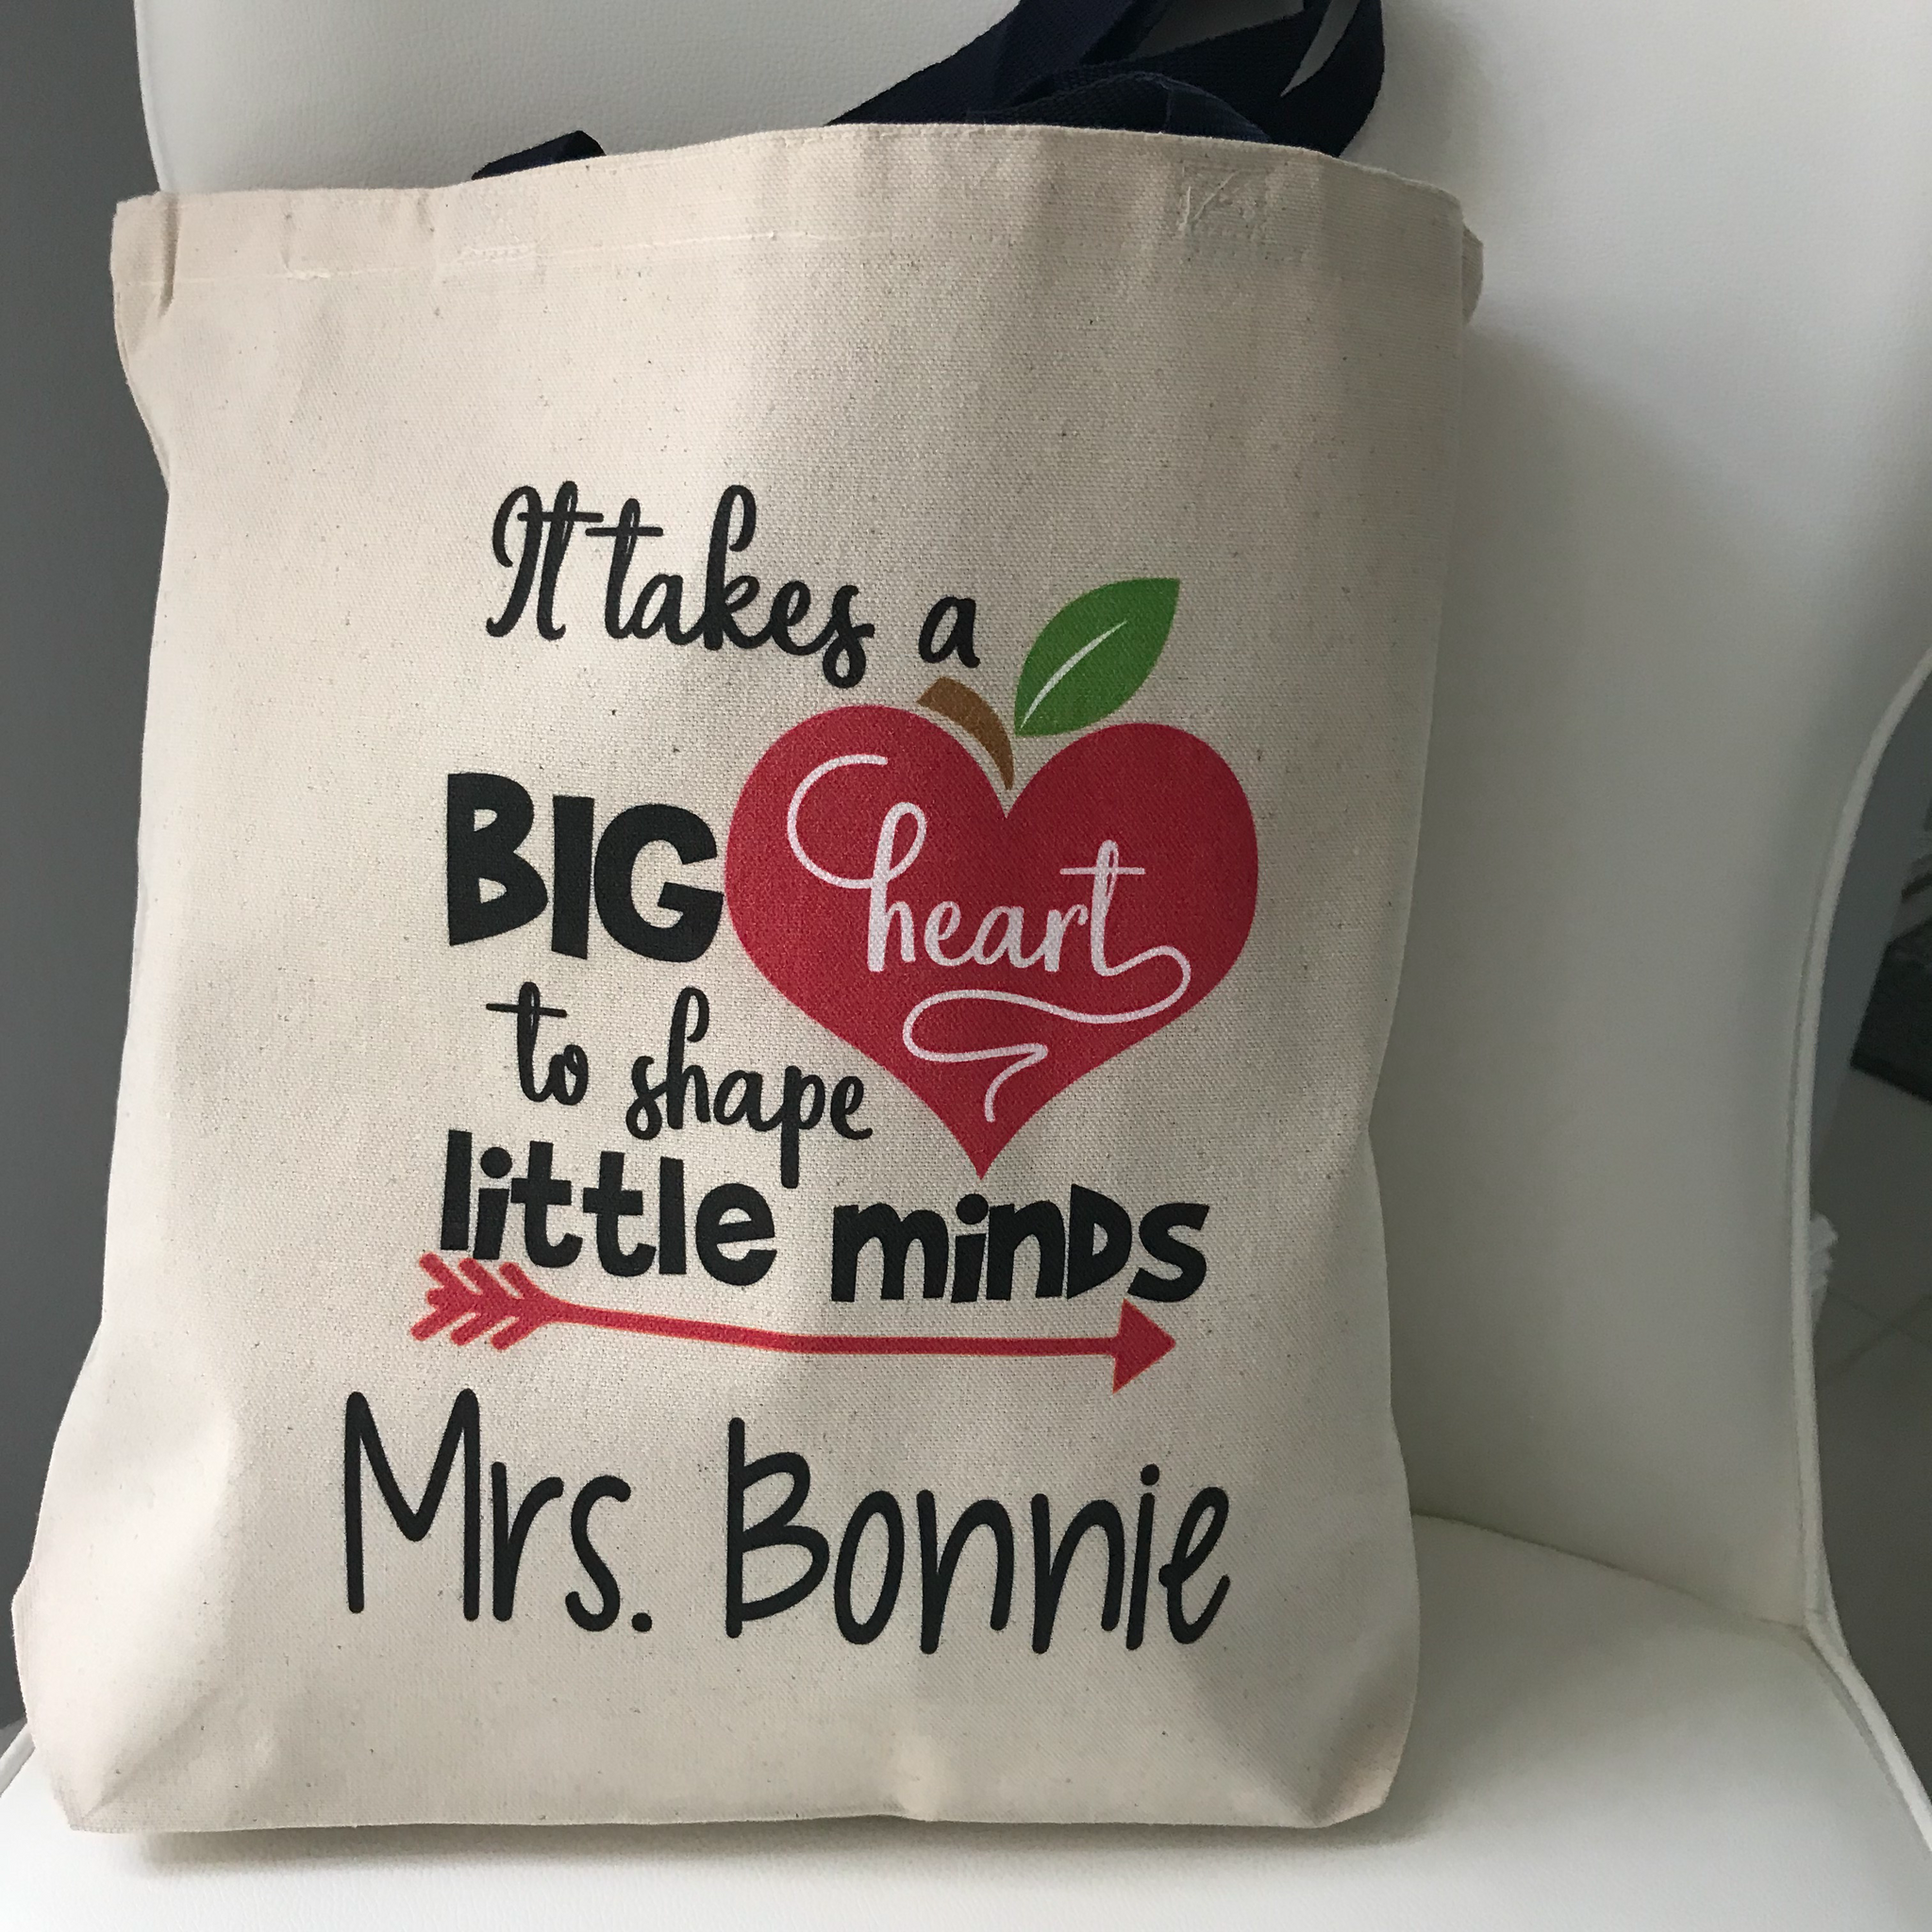 Personalized Canvas Tote Bag For Teacher - Does This Bag Makes My Paper  Look Graded Tote Bag